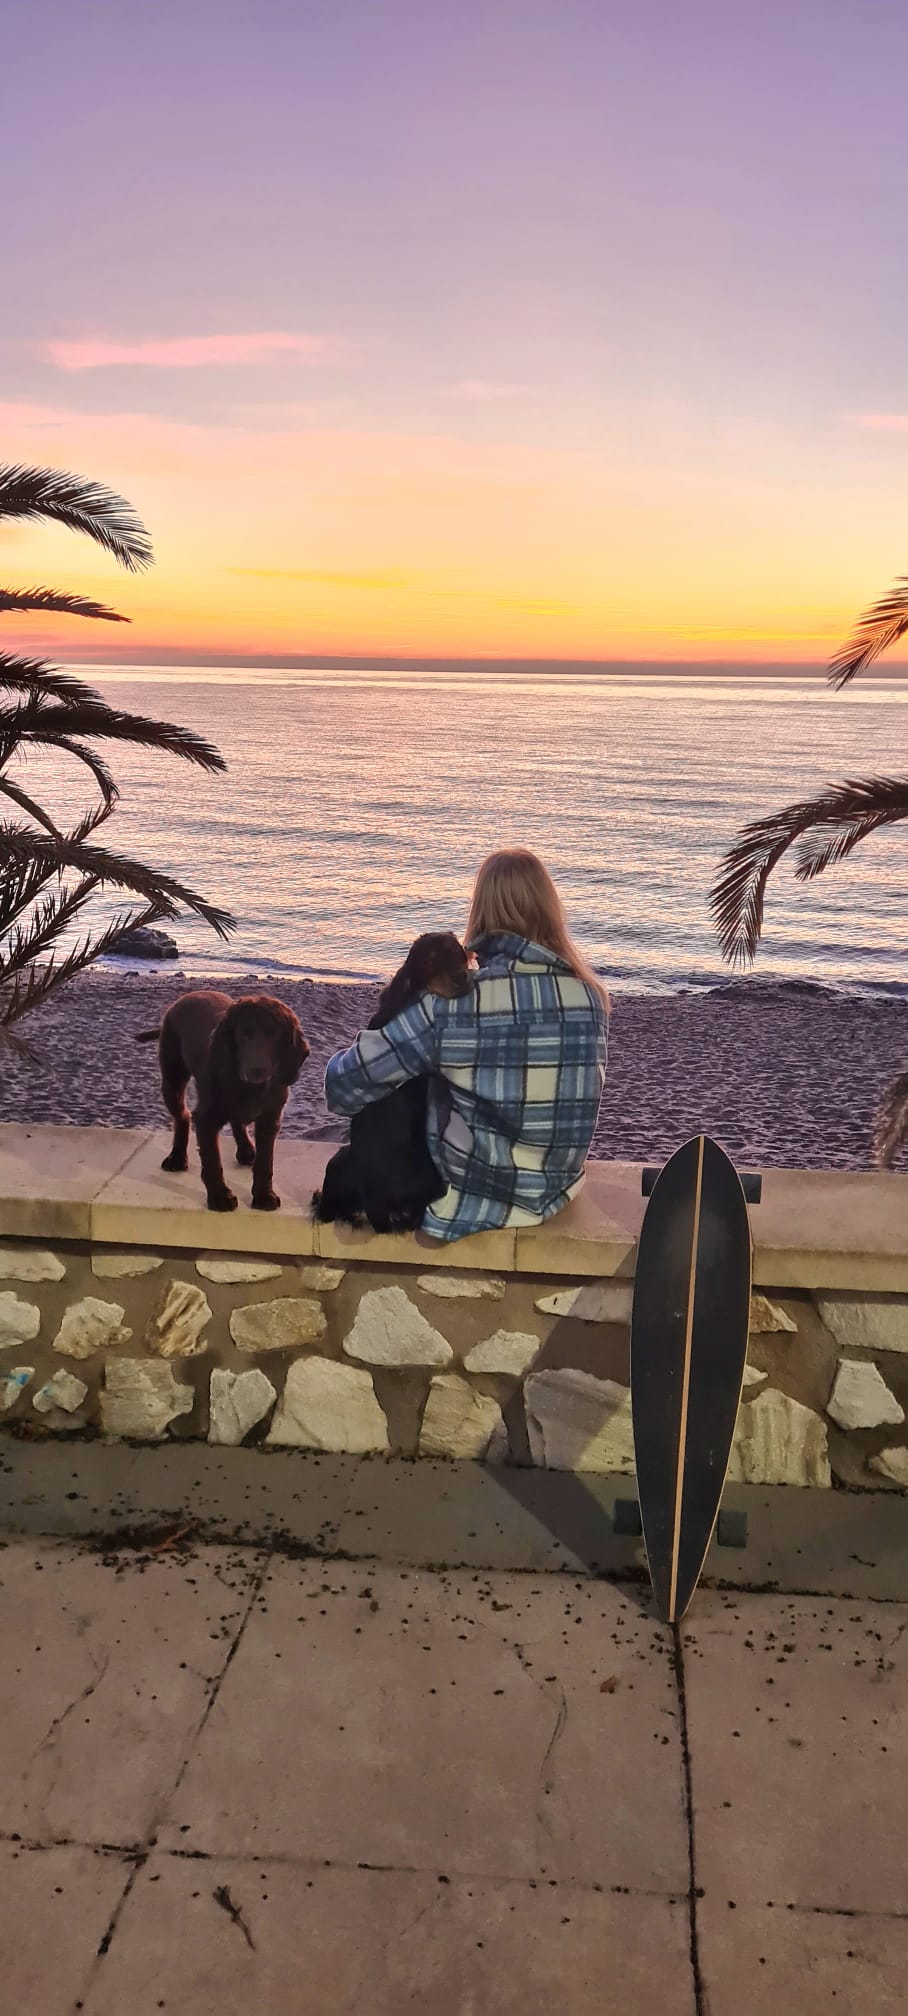 Sundown in Spain with my two dogs